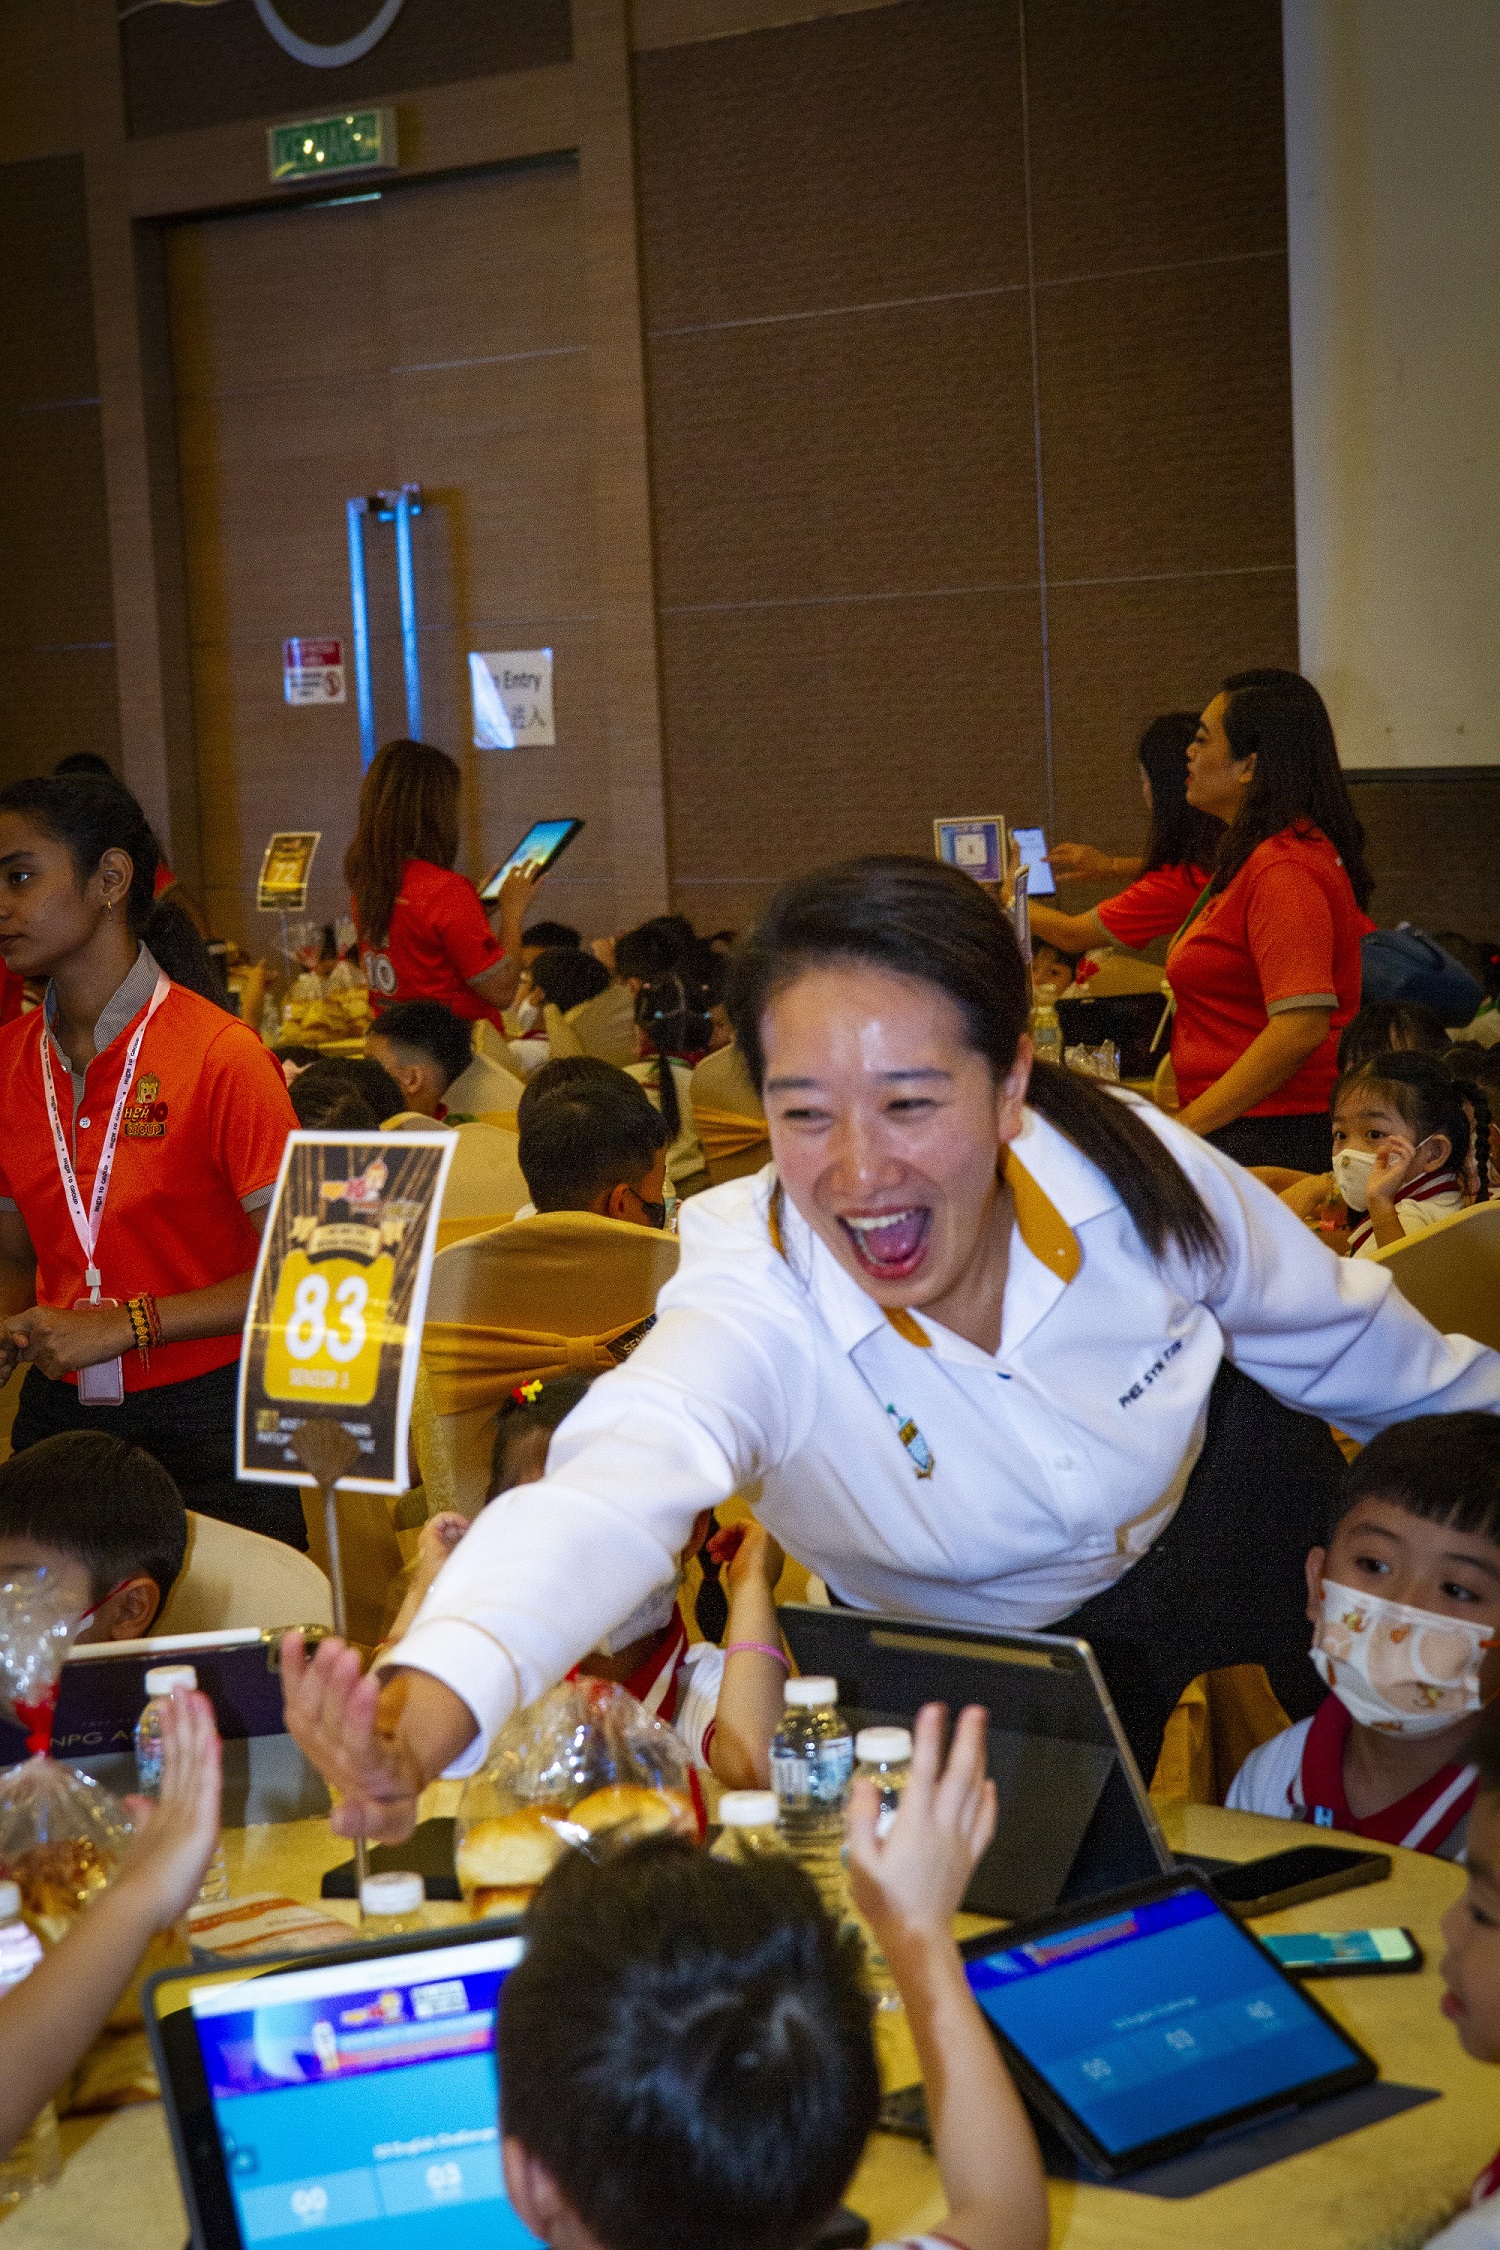 State Councilor Pang Sum Chee encouraged the young children who participated in the competition to break the record.